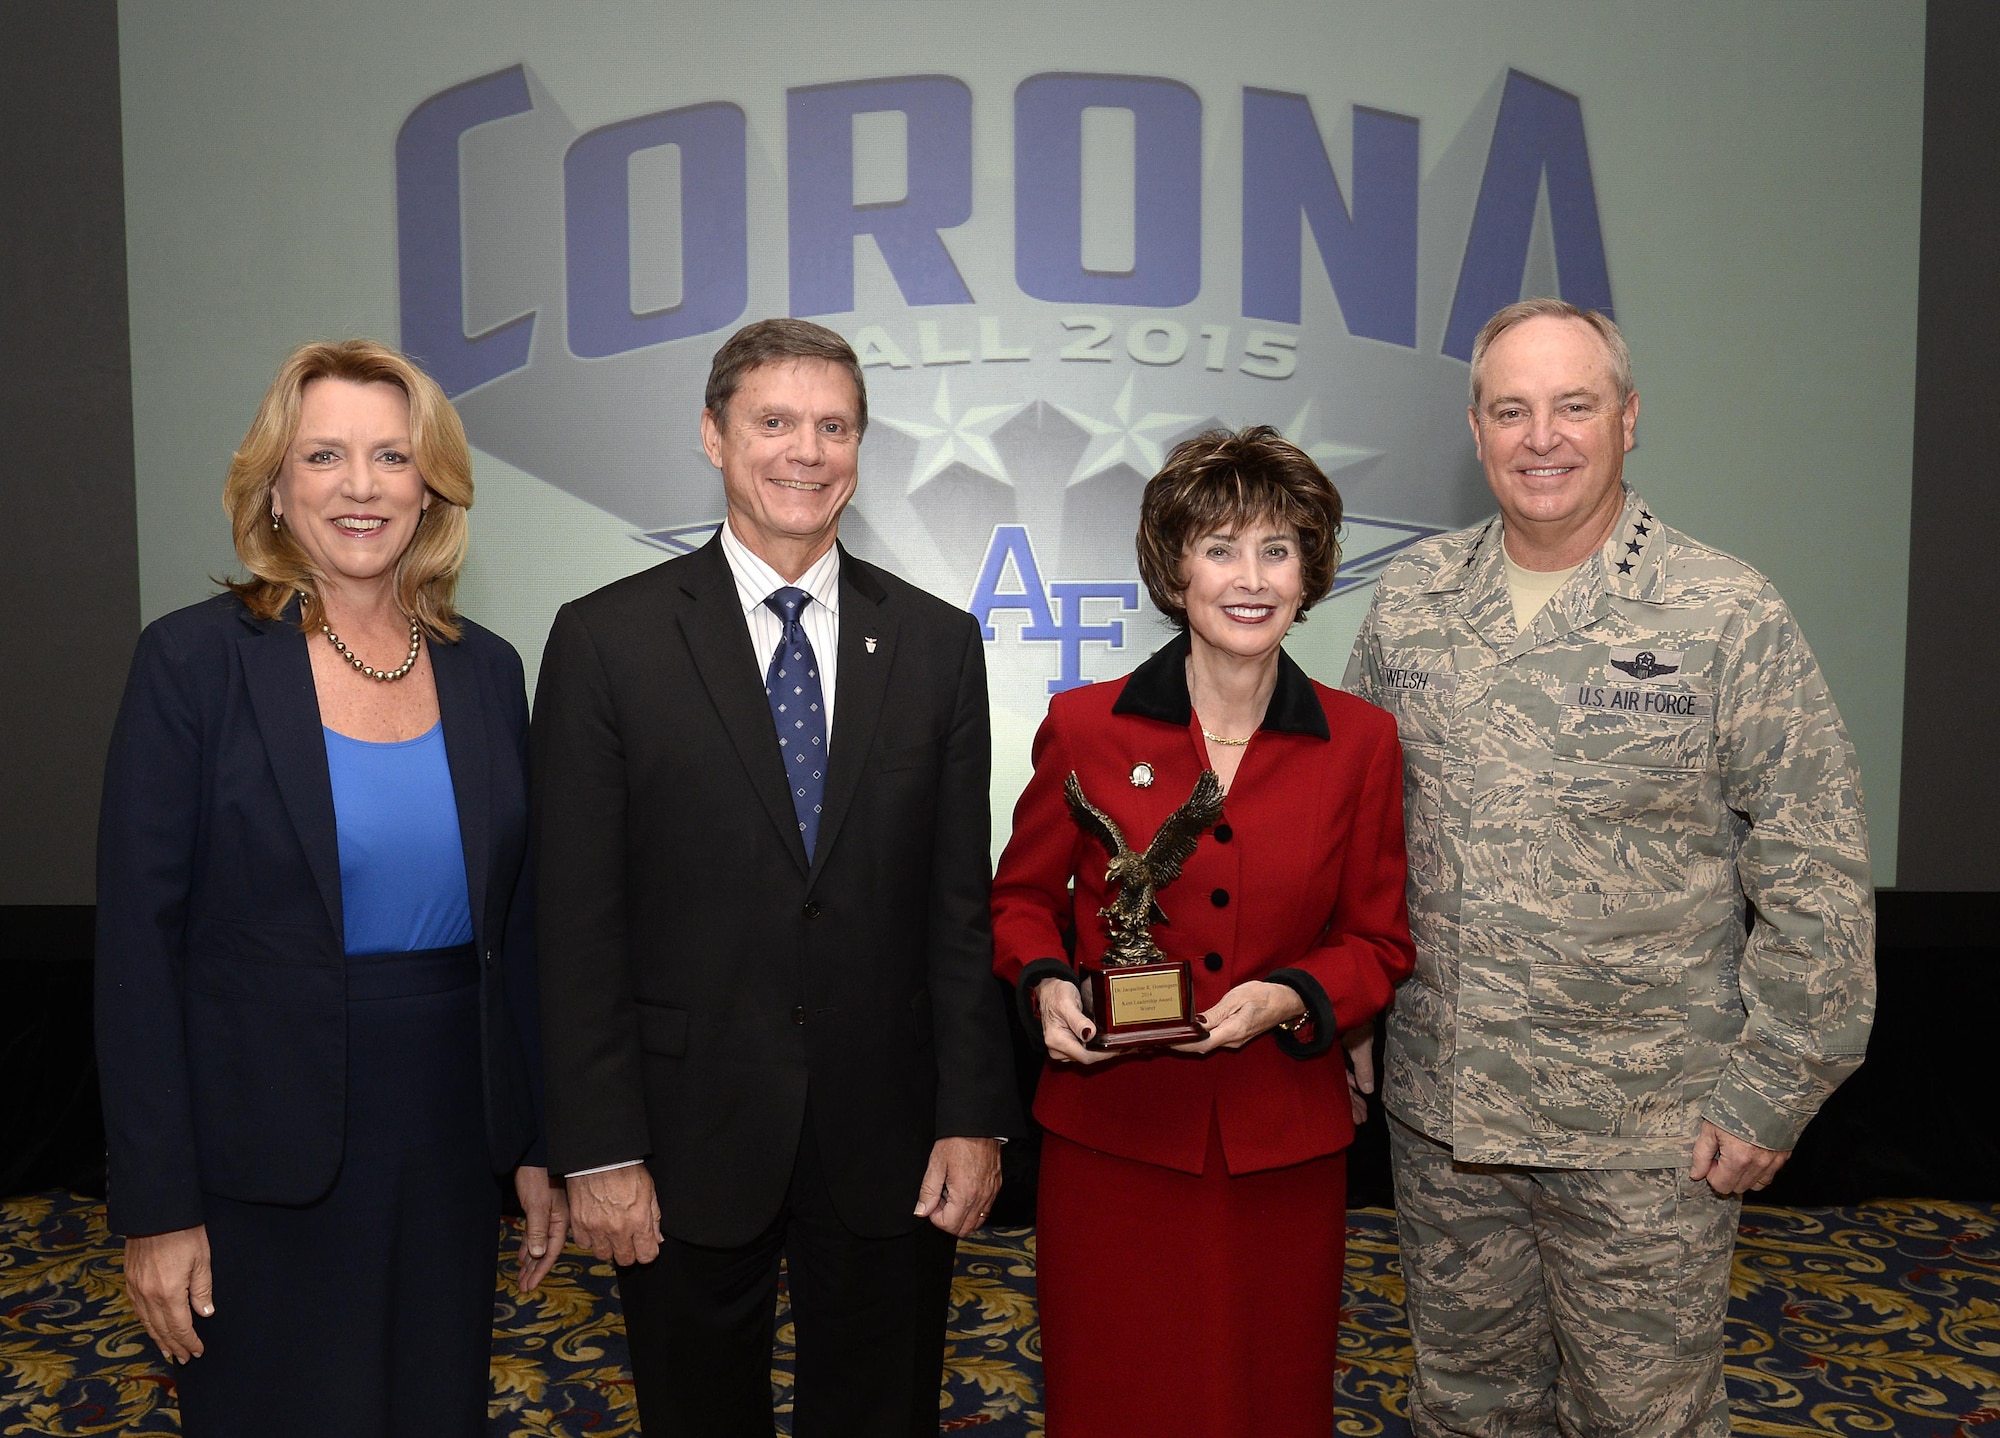 Secretary of the Air Force Deborah Lee James and Air Force Chief of Staff Gen. Mark A. Welsh III join Kevin Williams, the director of Air Force Studies, Analyses and Assessments, and Jacqueline Henningsen following the presentation of the Kent award at the Corona summit Nov. 4, 2015. The Kent award recognizes influential leaders with substantive analytic responsibilities during their career, whose vision and leadership have had a significant and lasting effect on the achievements of Air Force analysis. (U.S. Air Force photo/Scott Ash)